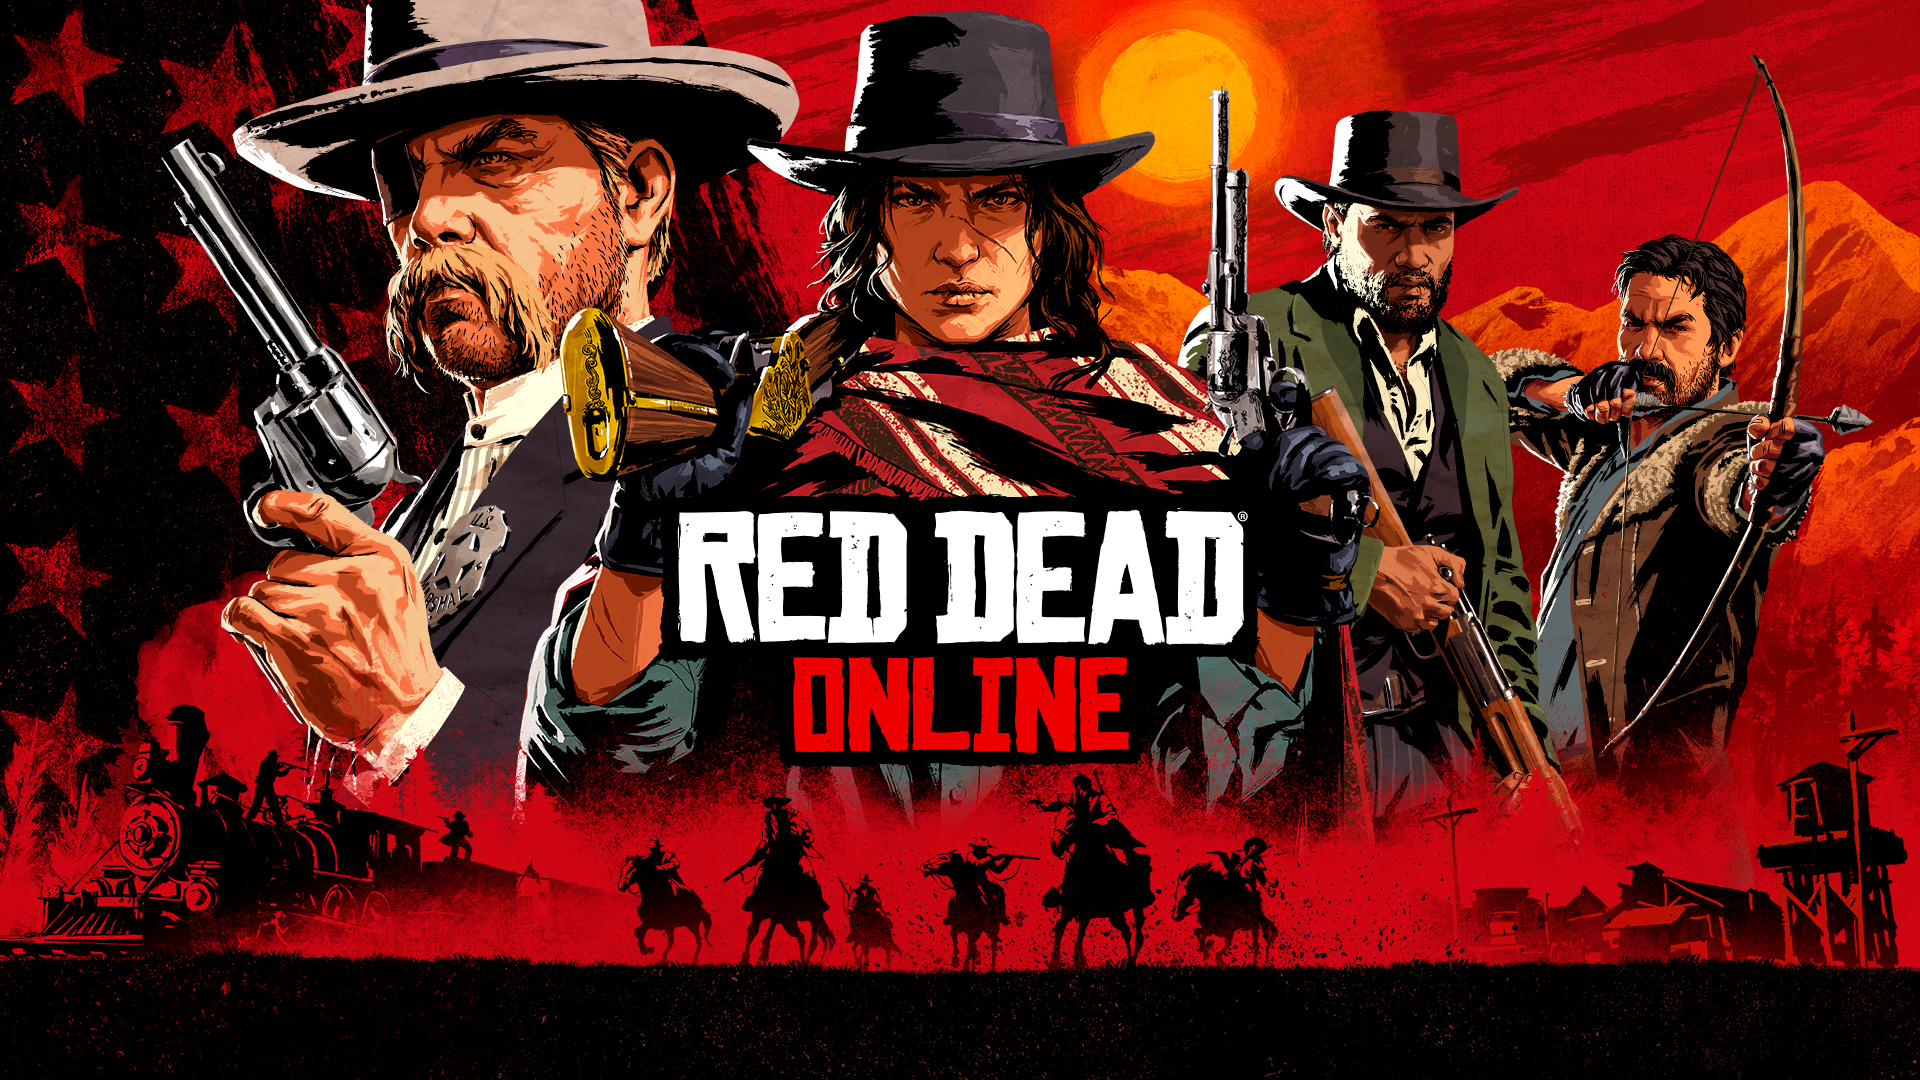 red dead redemption 2 price xbox store